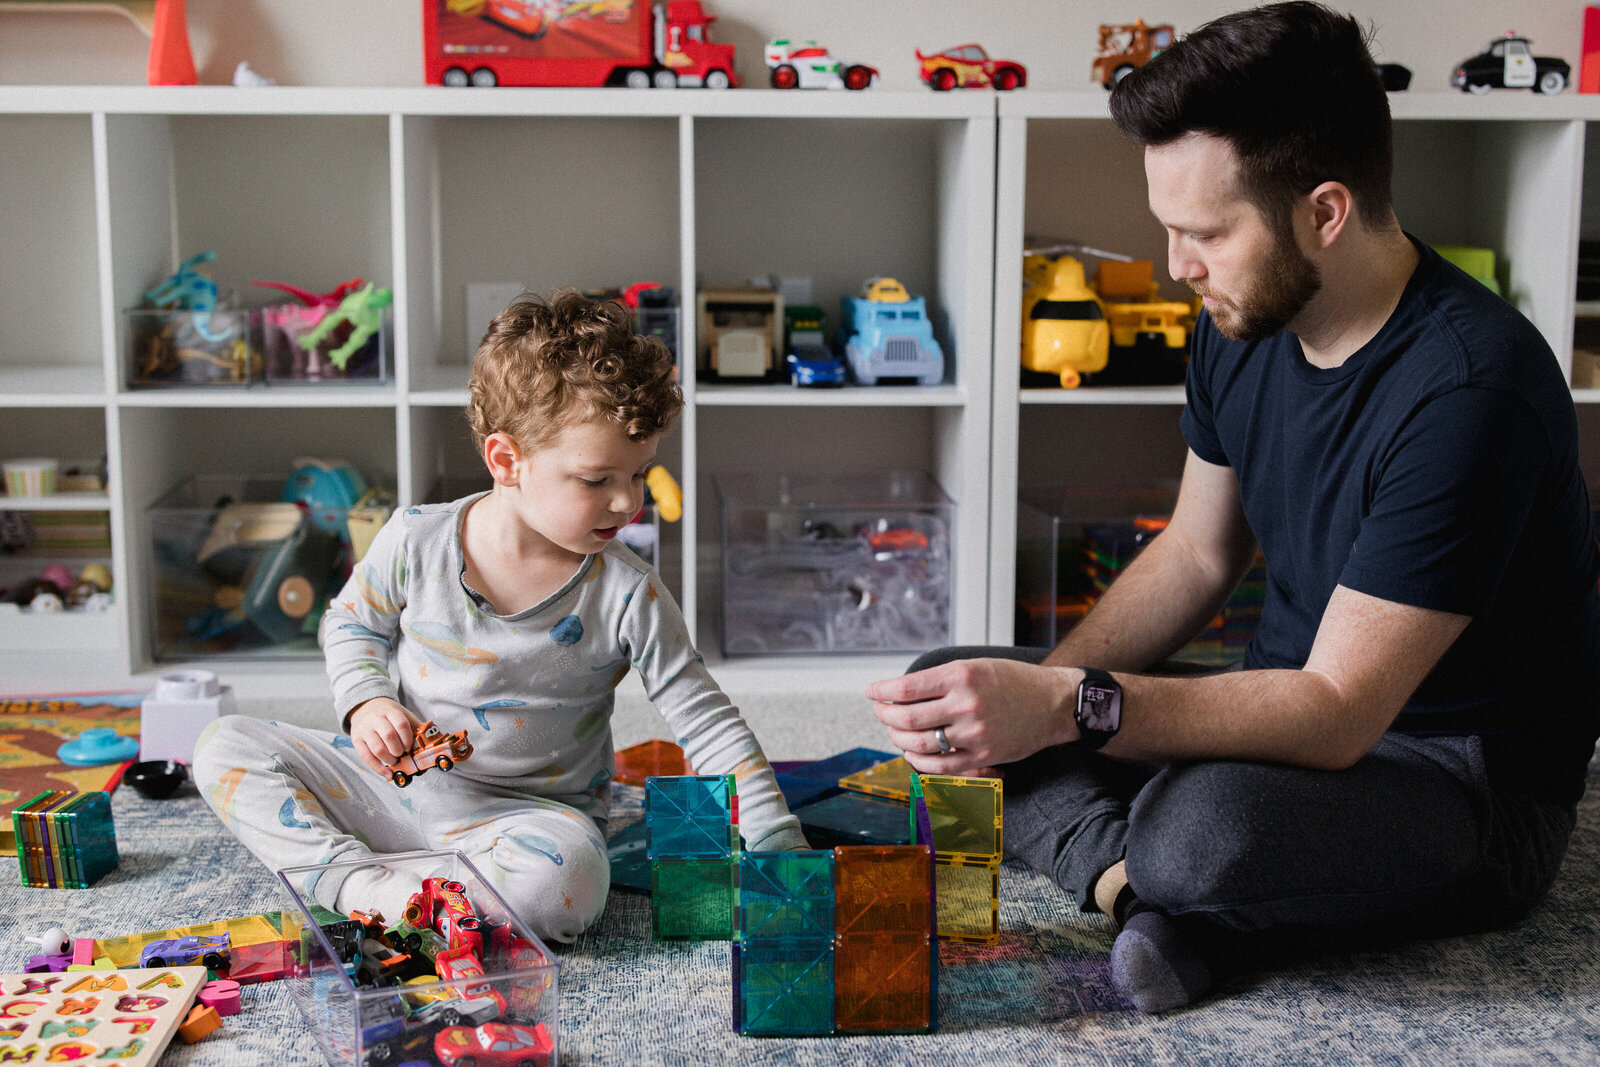 Dad and son building colorful tower in playroom